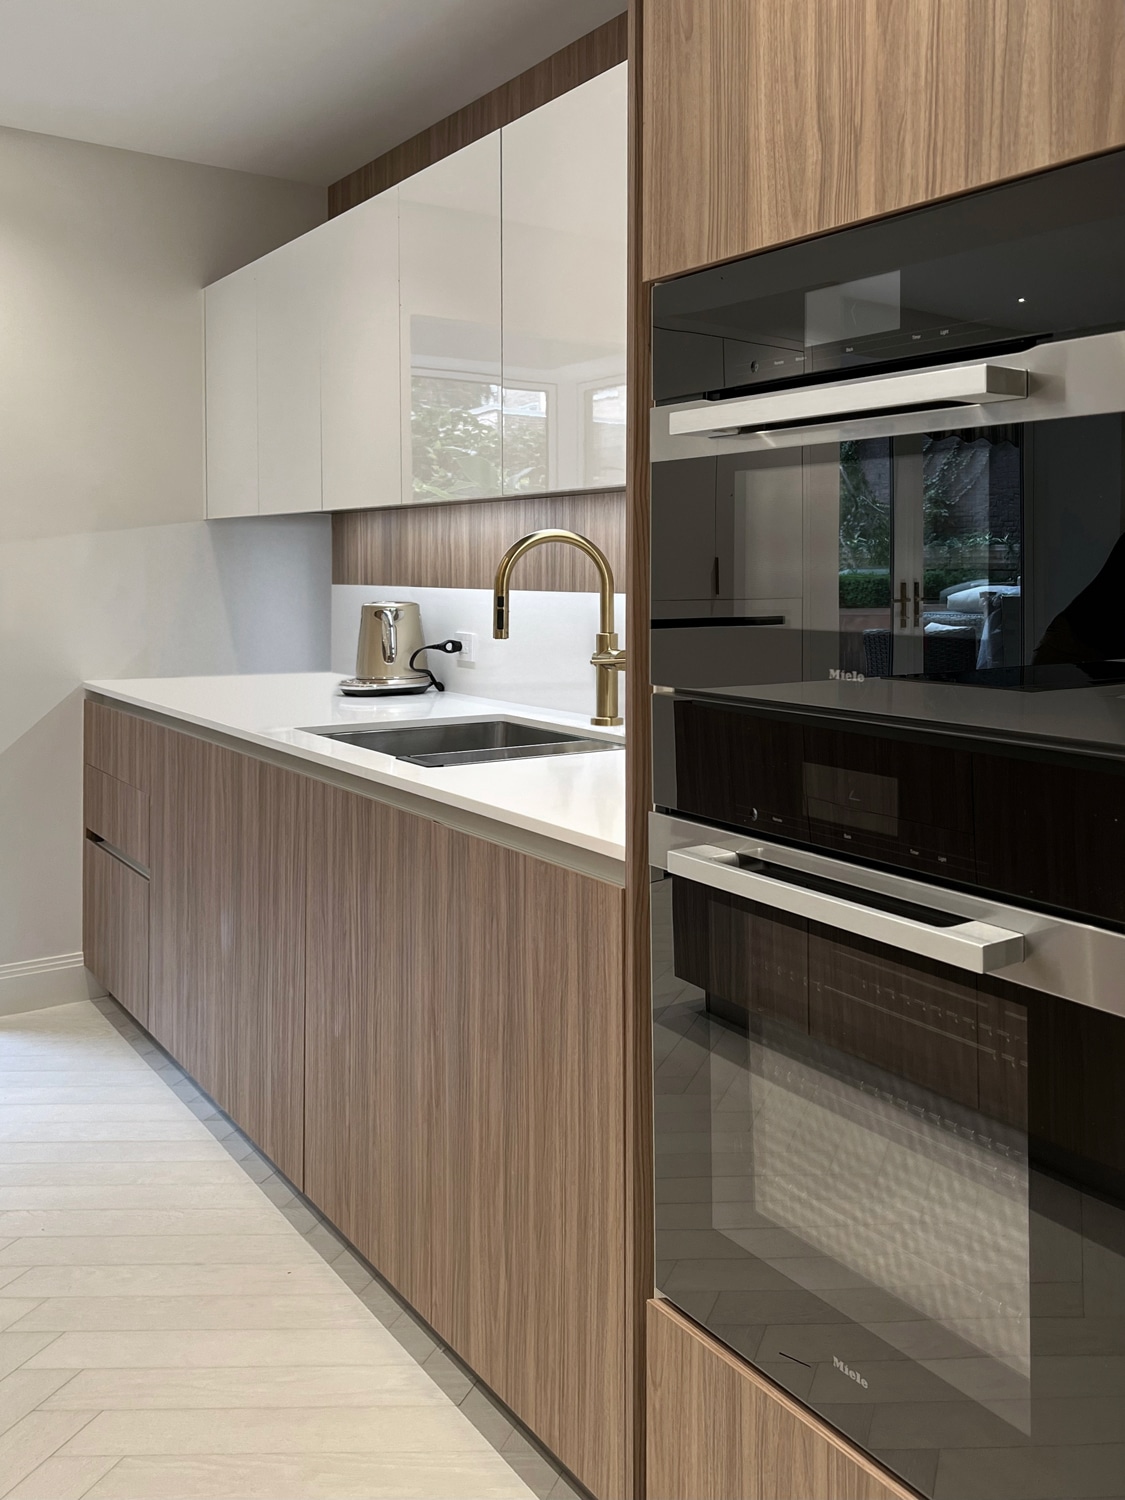 New York, New York. Here we see Omicron, Rho & Kappa kitchen cabinetry in Noce Carmel & White Gloss finishes. Appliances are Miele & Sub Zero. The Renovated Home, NY, the Project Designer worked in collaboration with Lorena Polon, Senior Designer Consultant with the MandiCasa New York showroom.